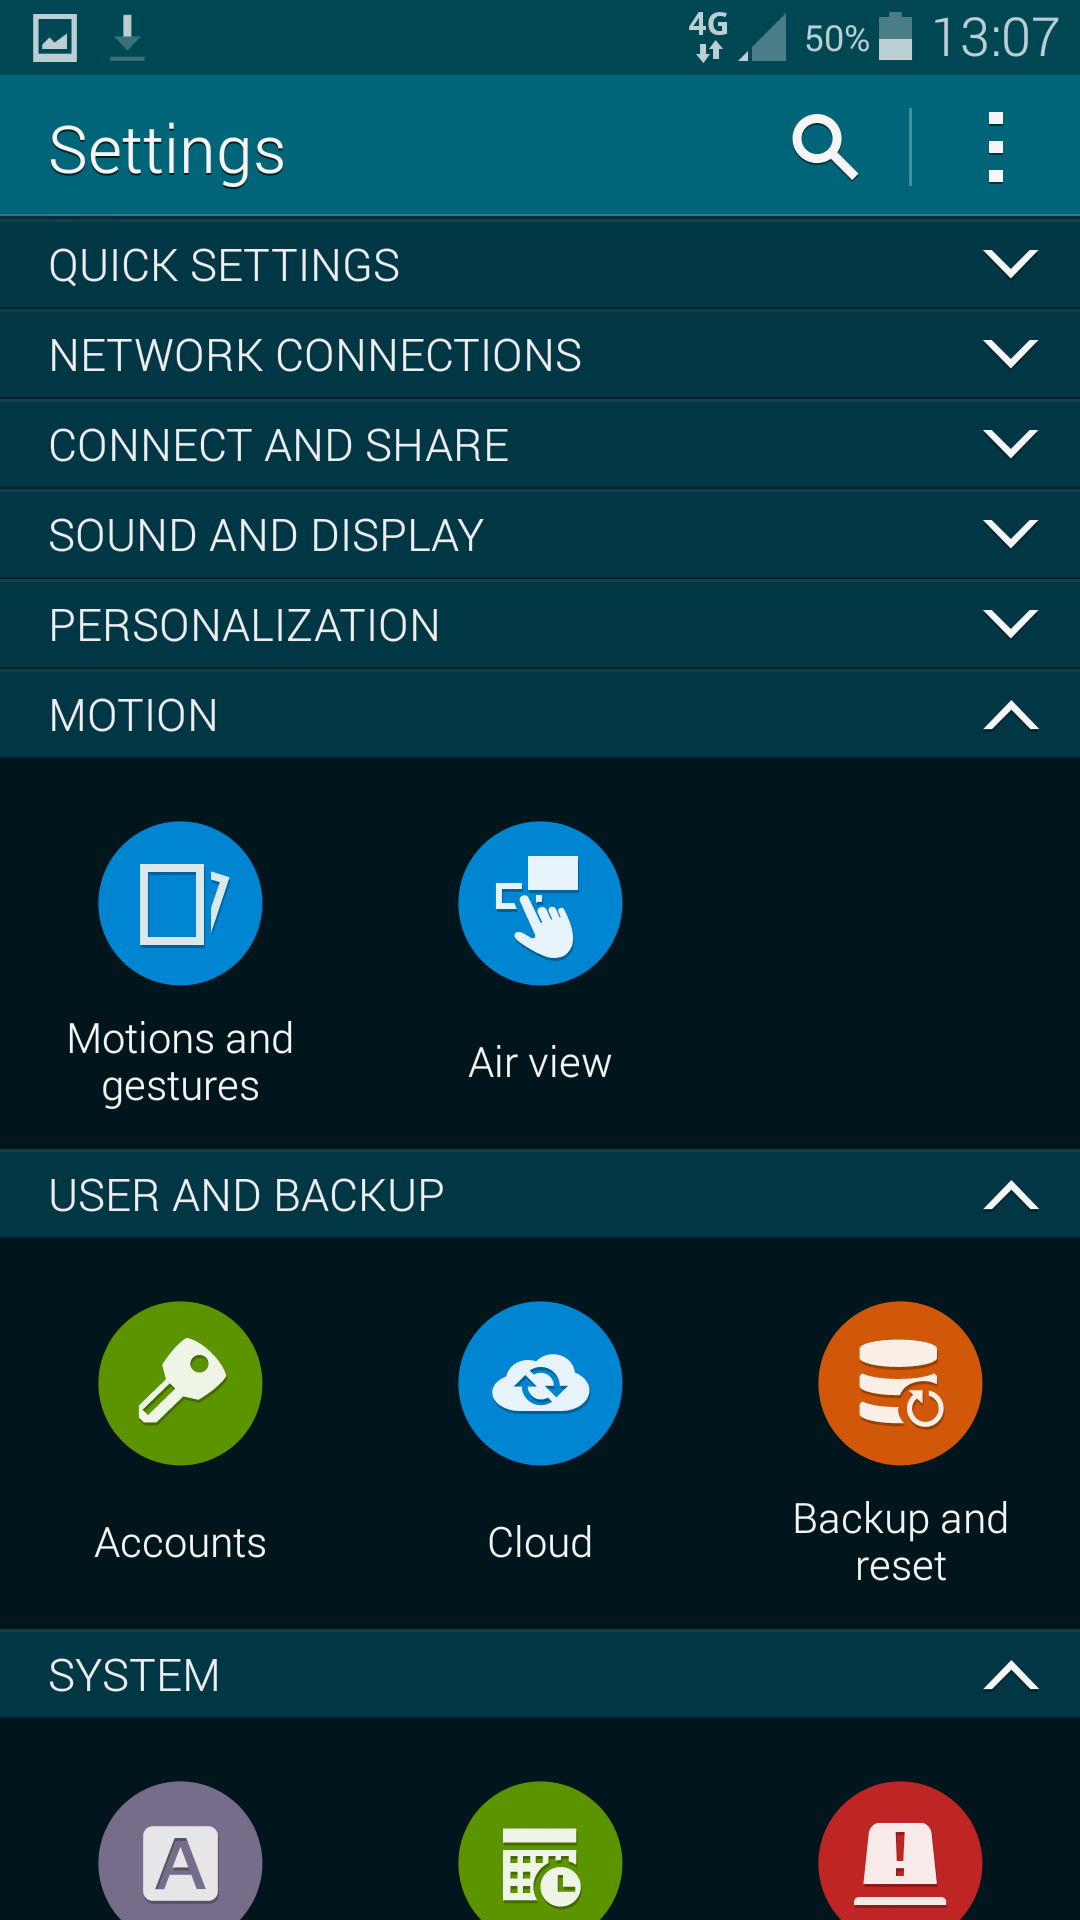 ycptech reviews samsung galaxy s5 settings page